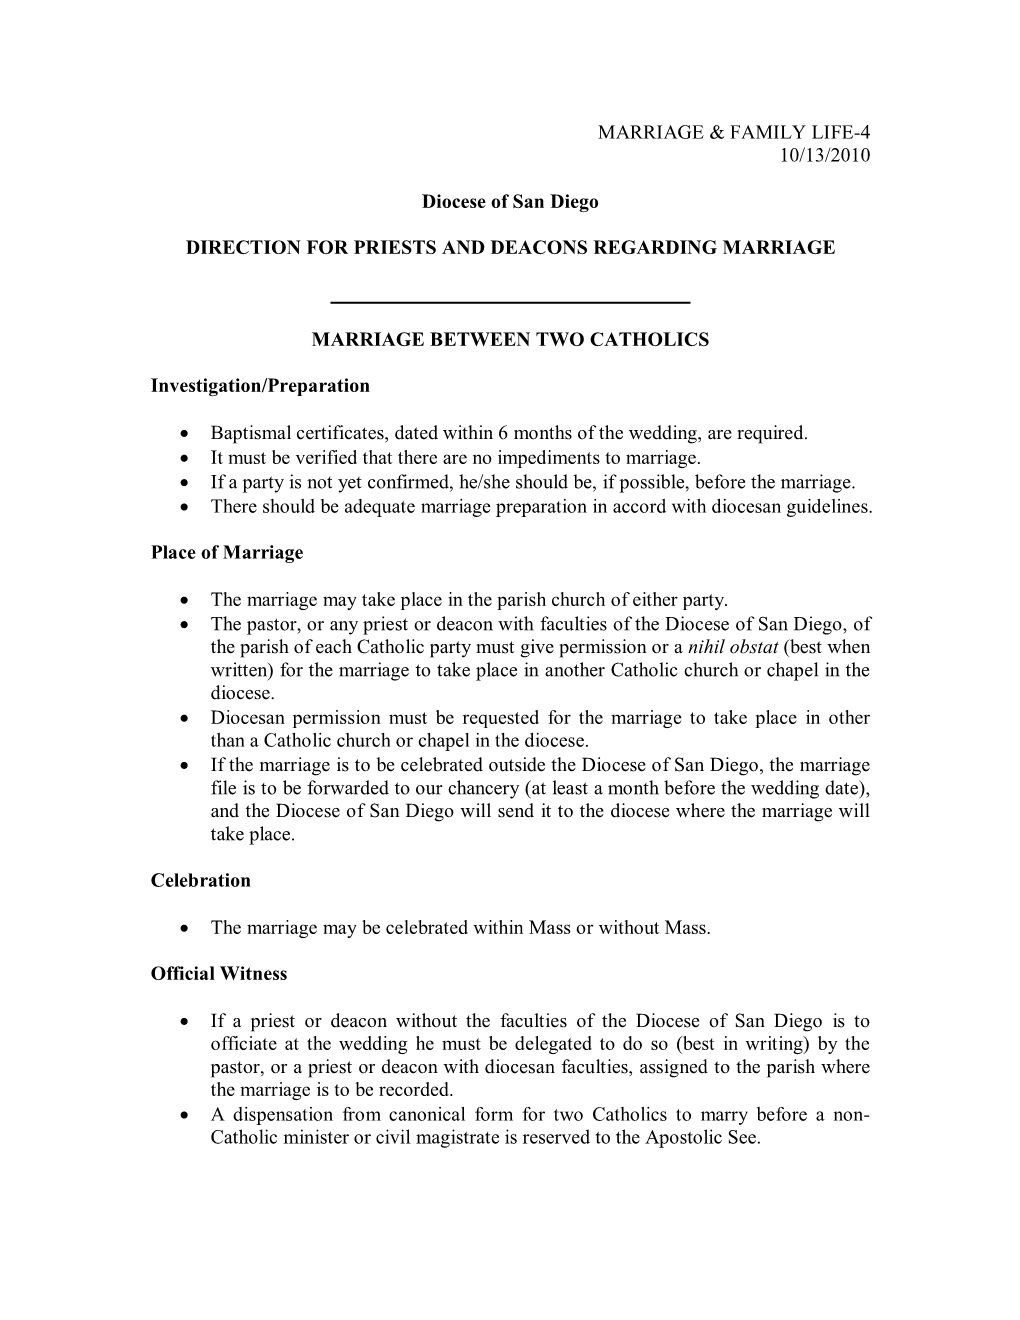 Directions for Priests and Deacons Regarding Marriage